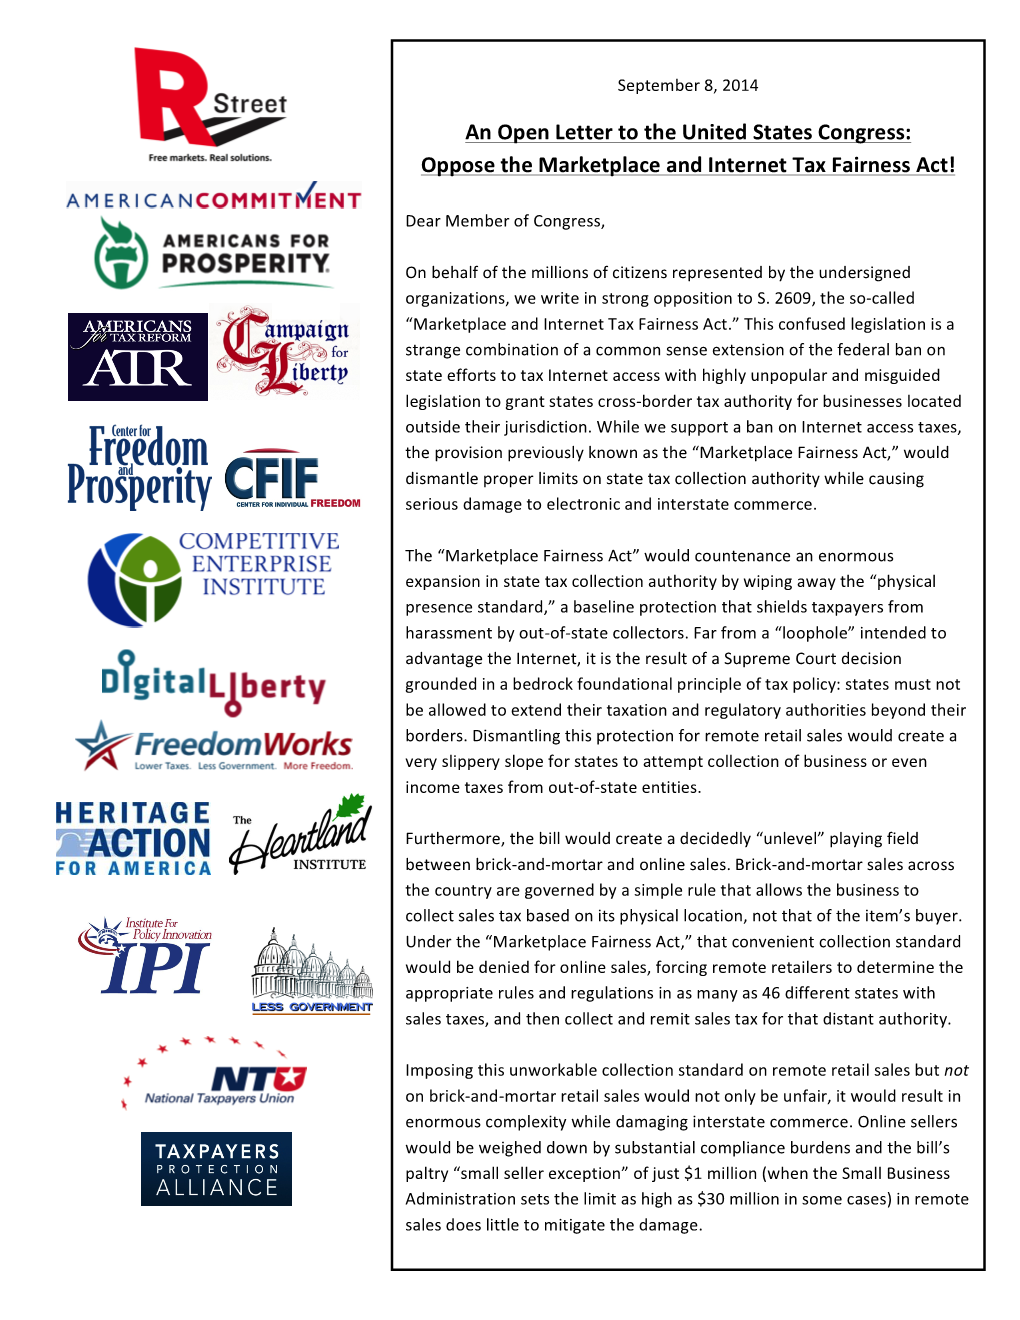 An Open Letter to the United States Congress: Oppose the Marketplace and Internet Tax Fairness Act!